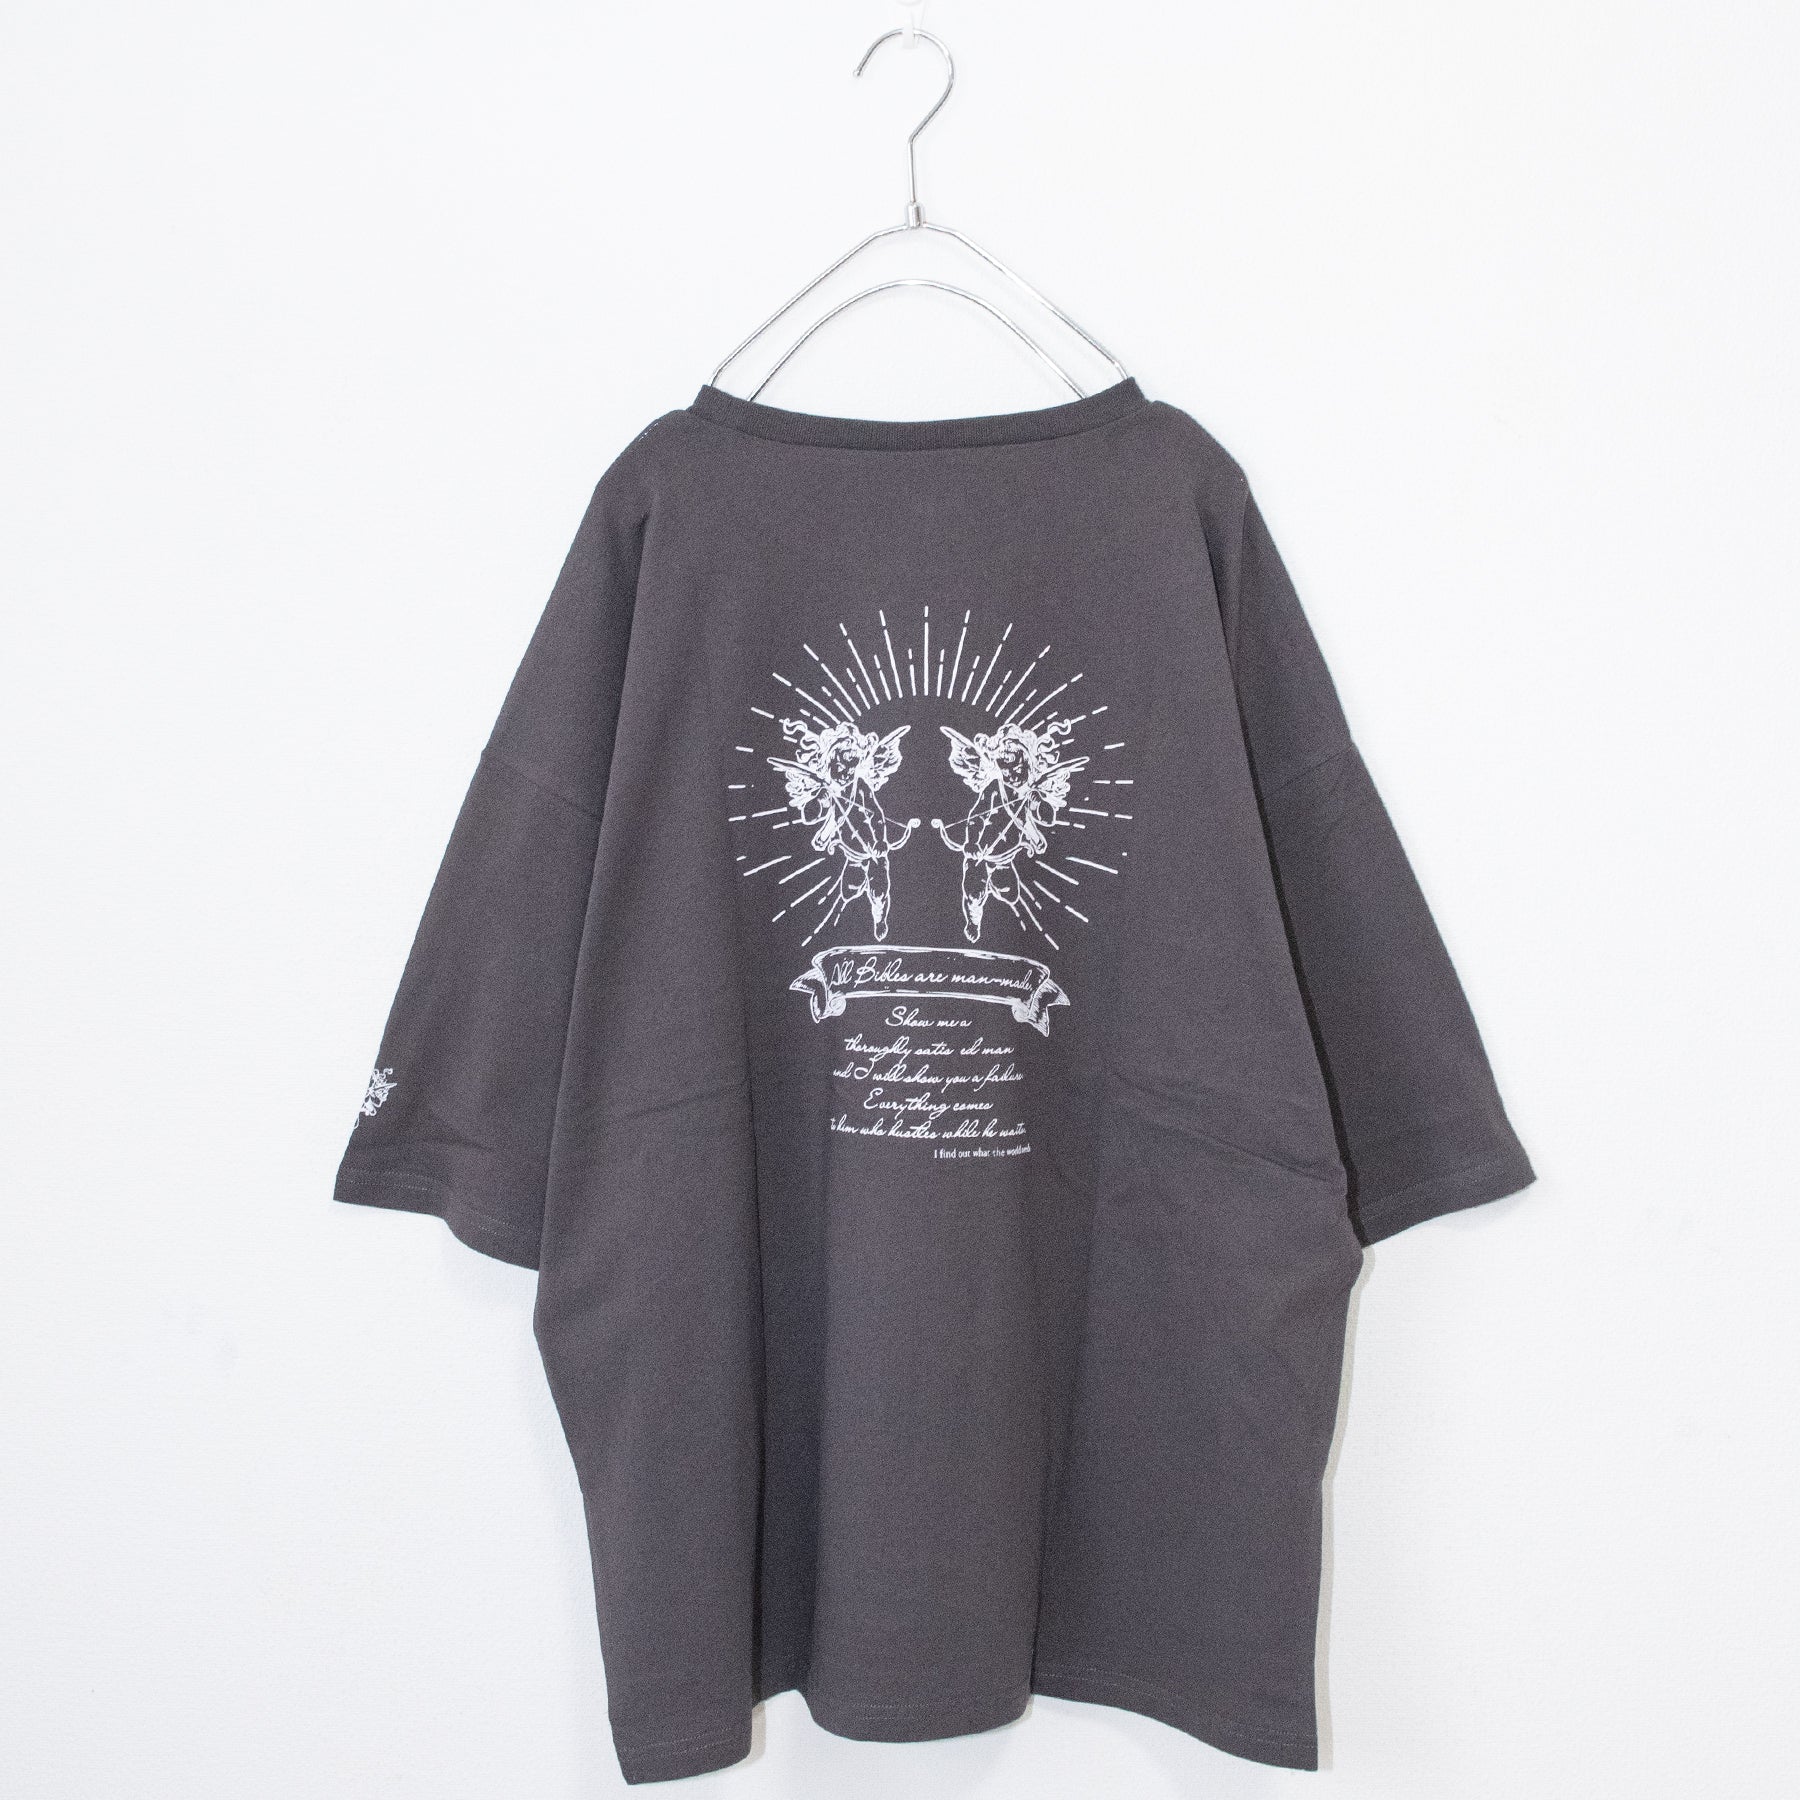 Angel S/S T-shirt (4 color) - YOUAREMYPOISON